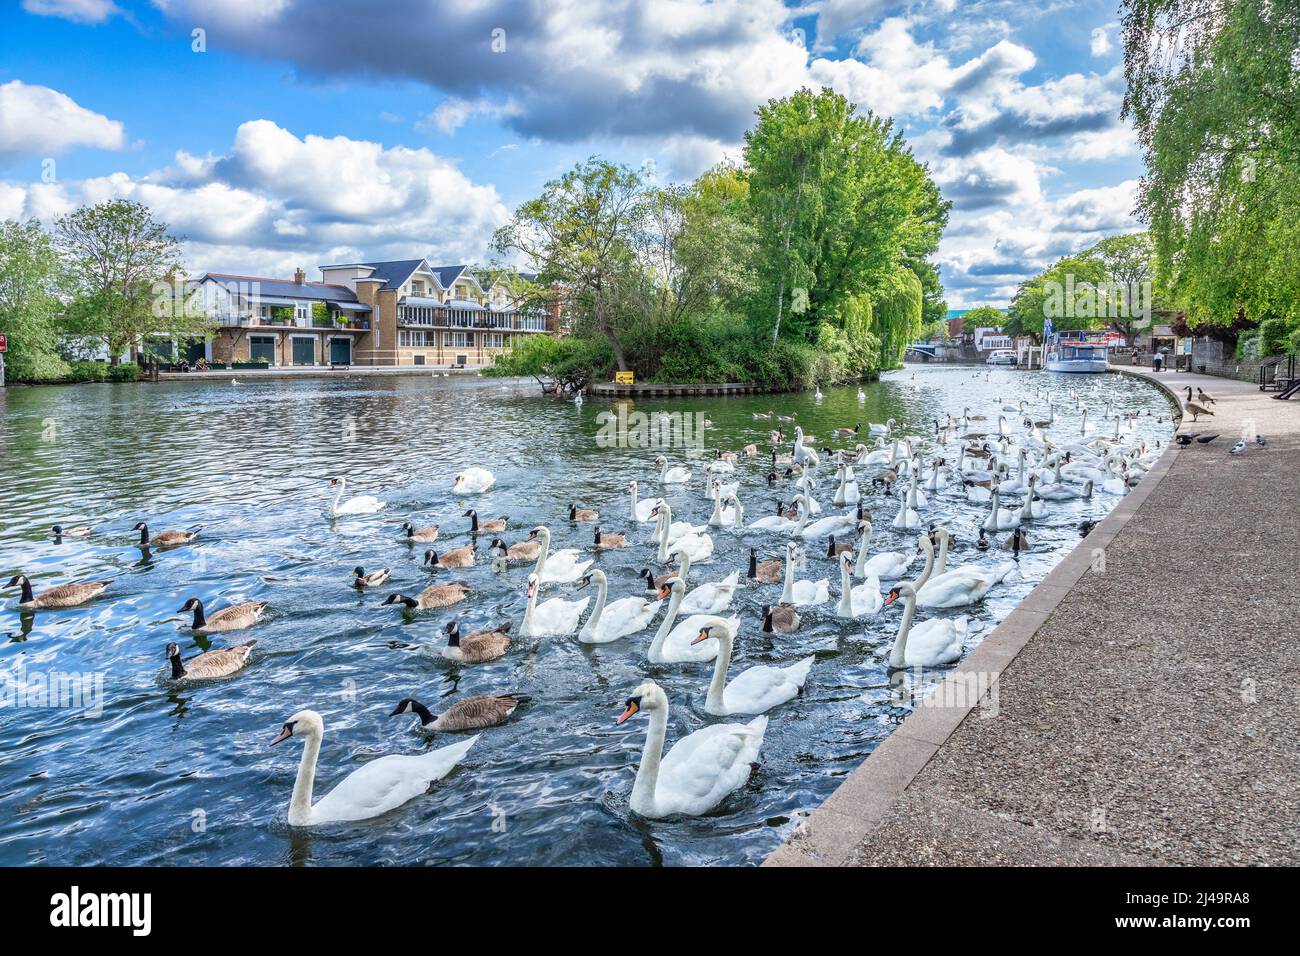 5 June 2019: Windsor, UK - Swans and Canada Geese on the River Thames. Stock Photo